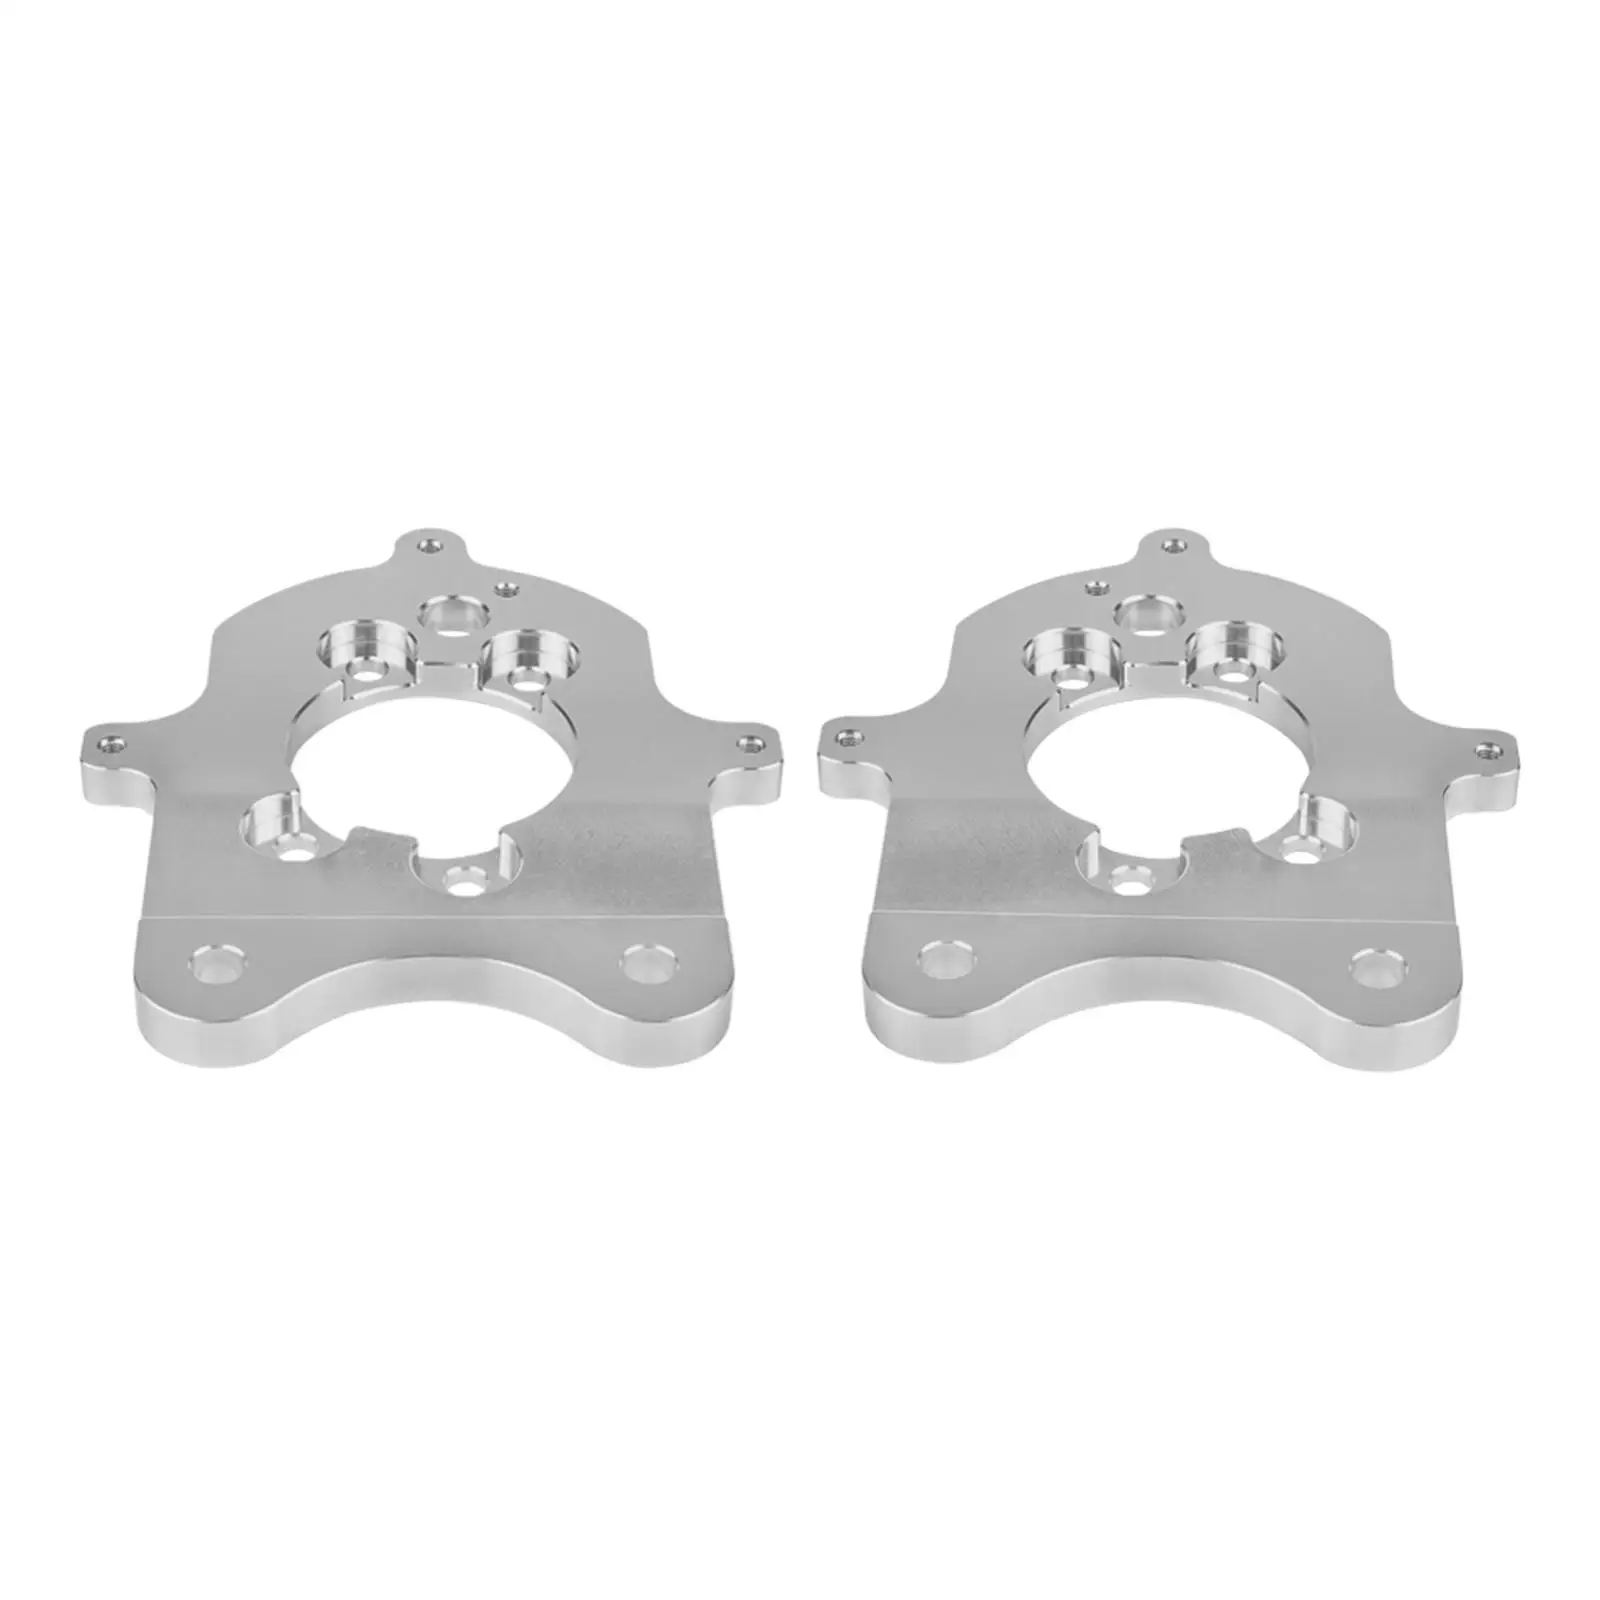 2 Pieces Rear Brake Caliper Mounting Bracket Accessories for SN95 Practical